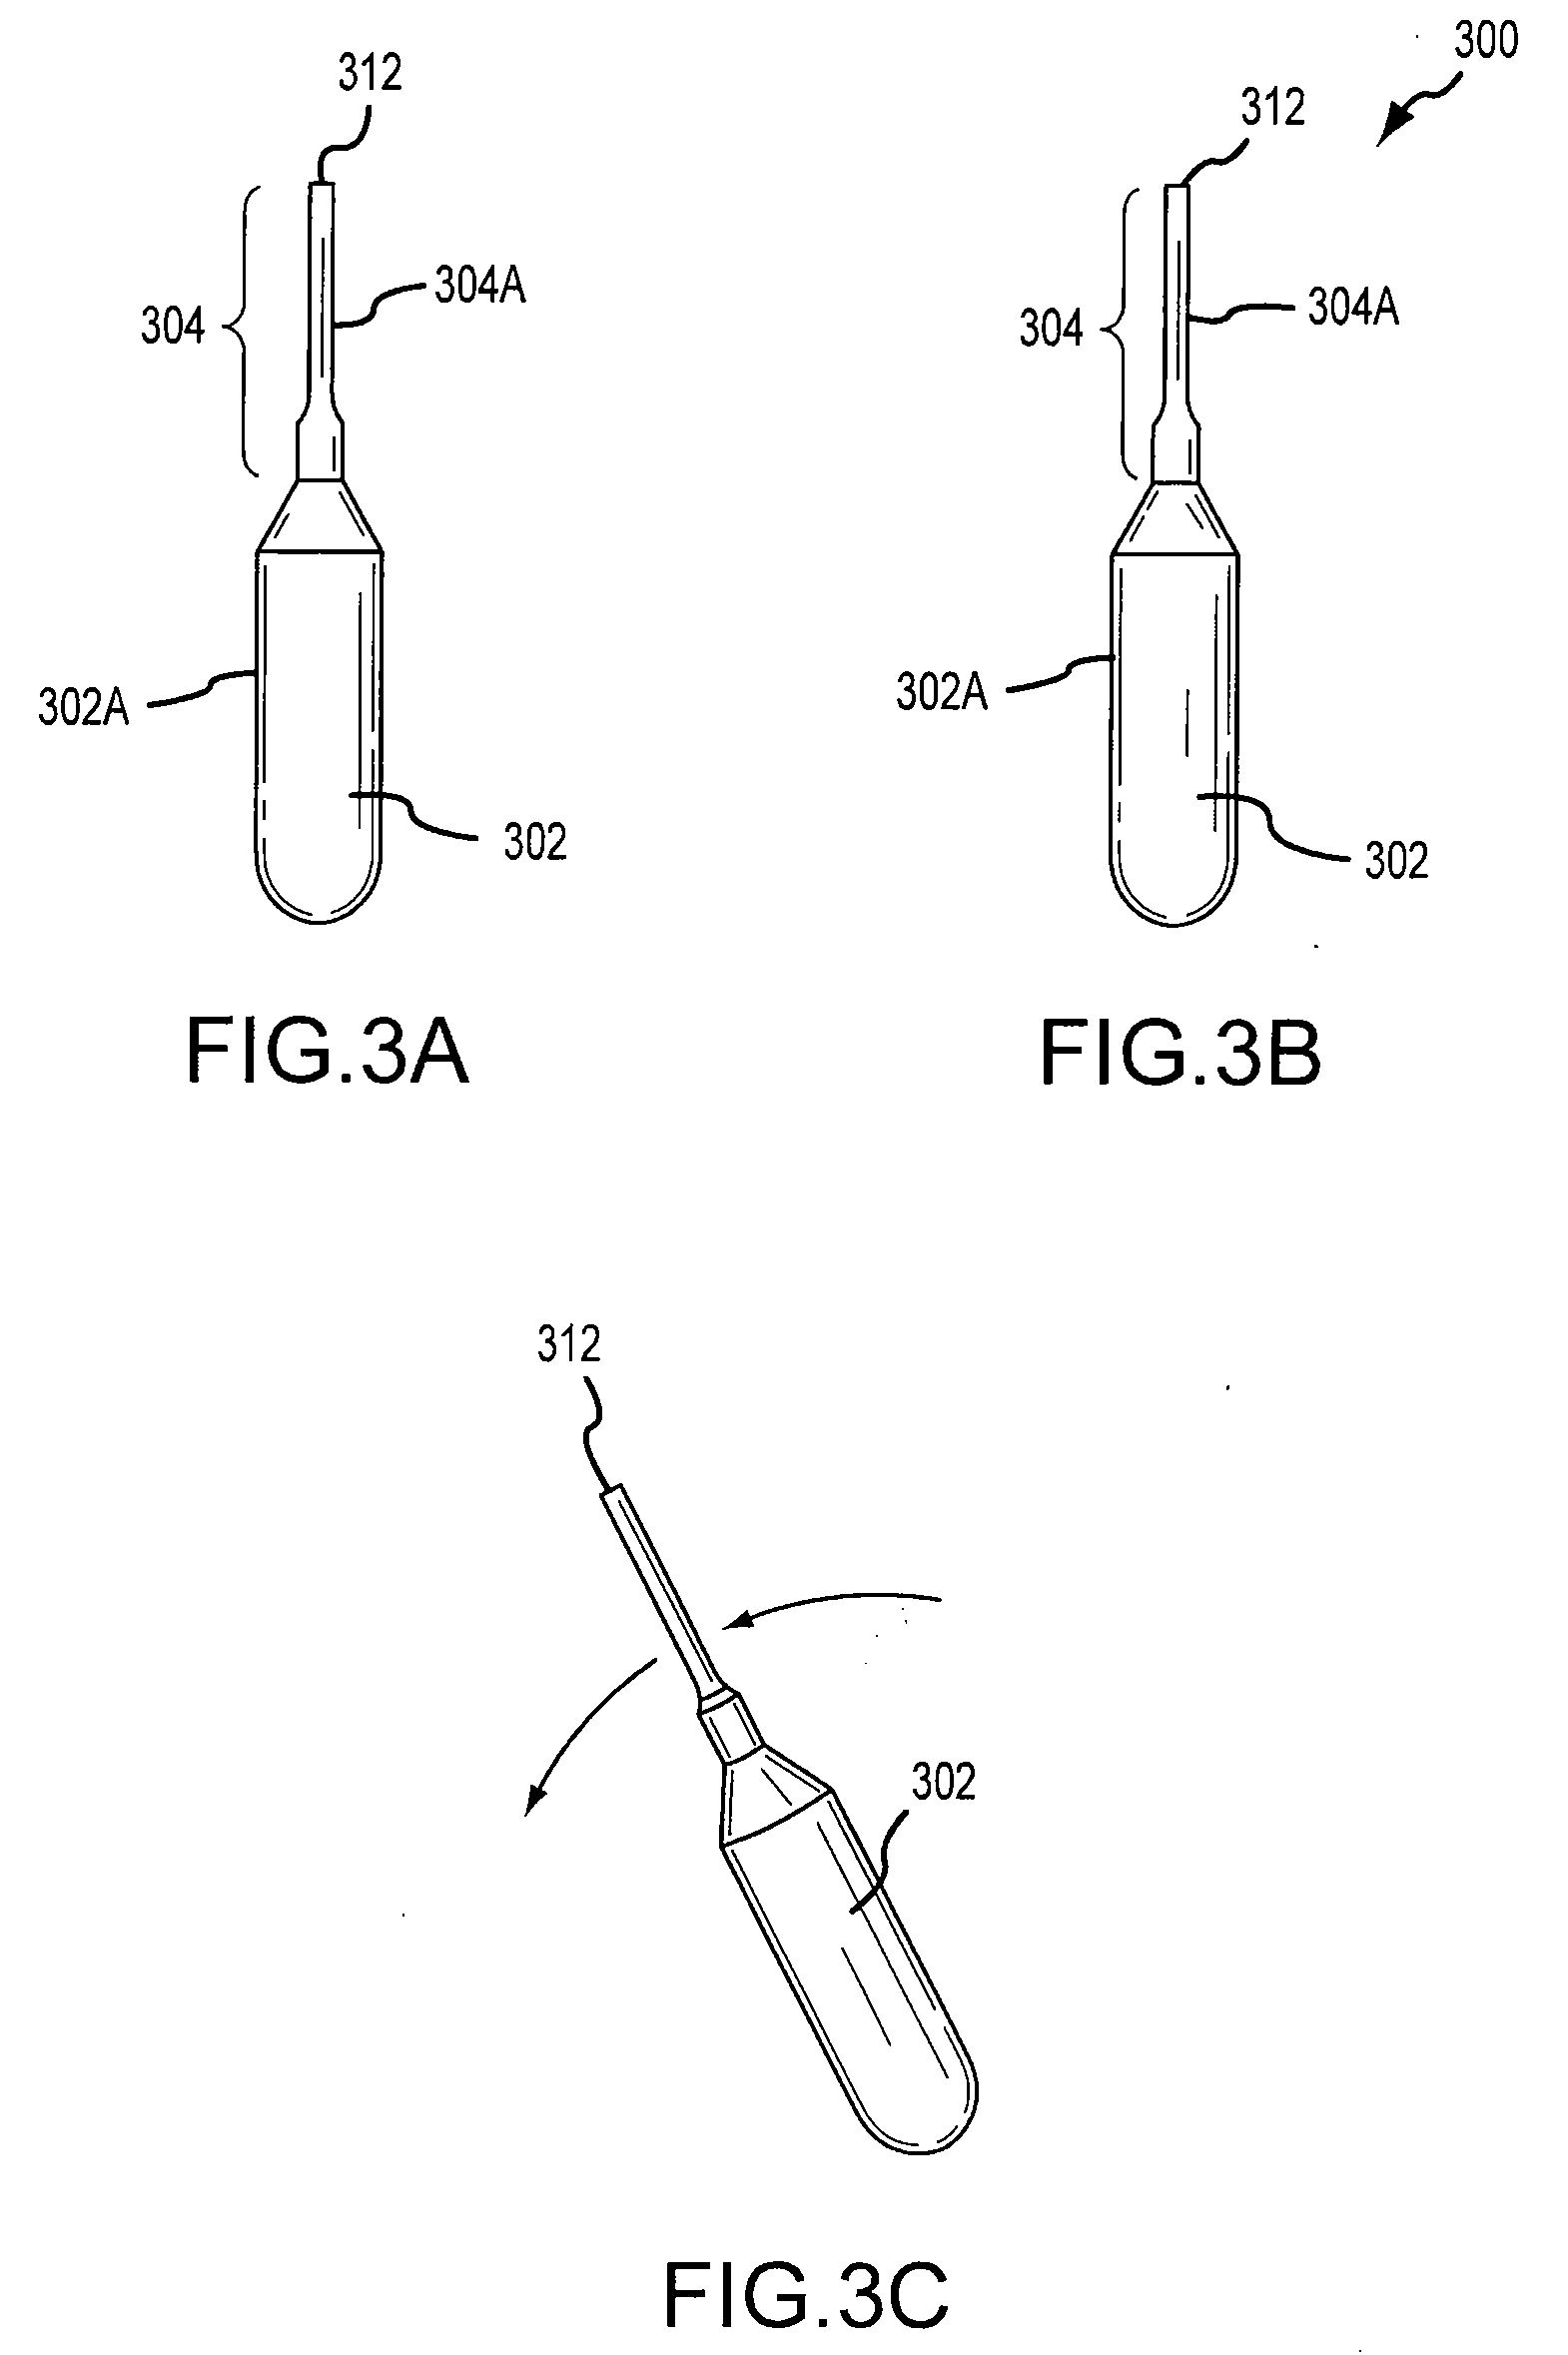 Method and system for facilitating and maintaining oral health through prescribed applications of oral compositions